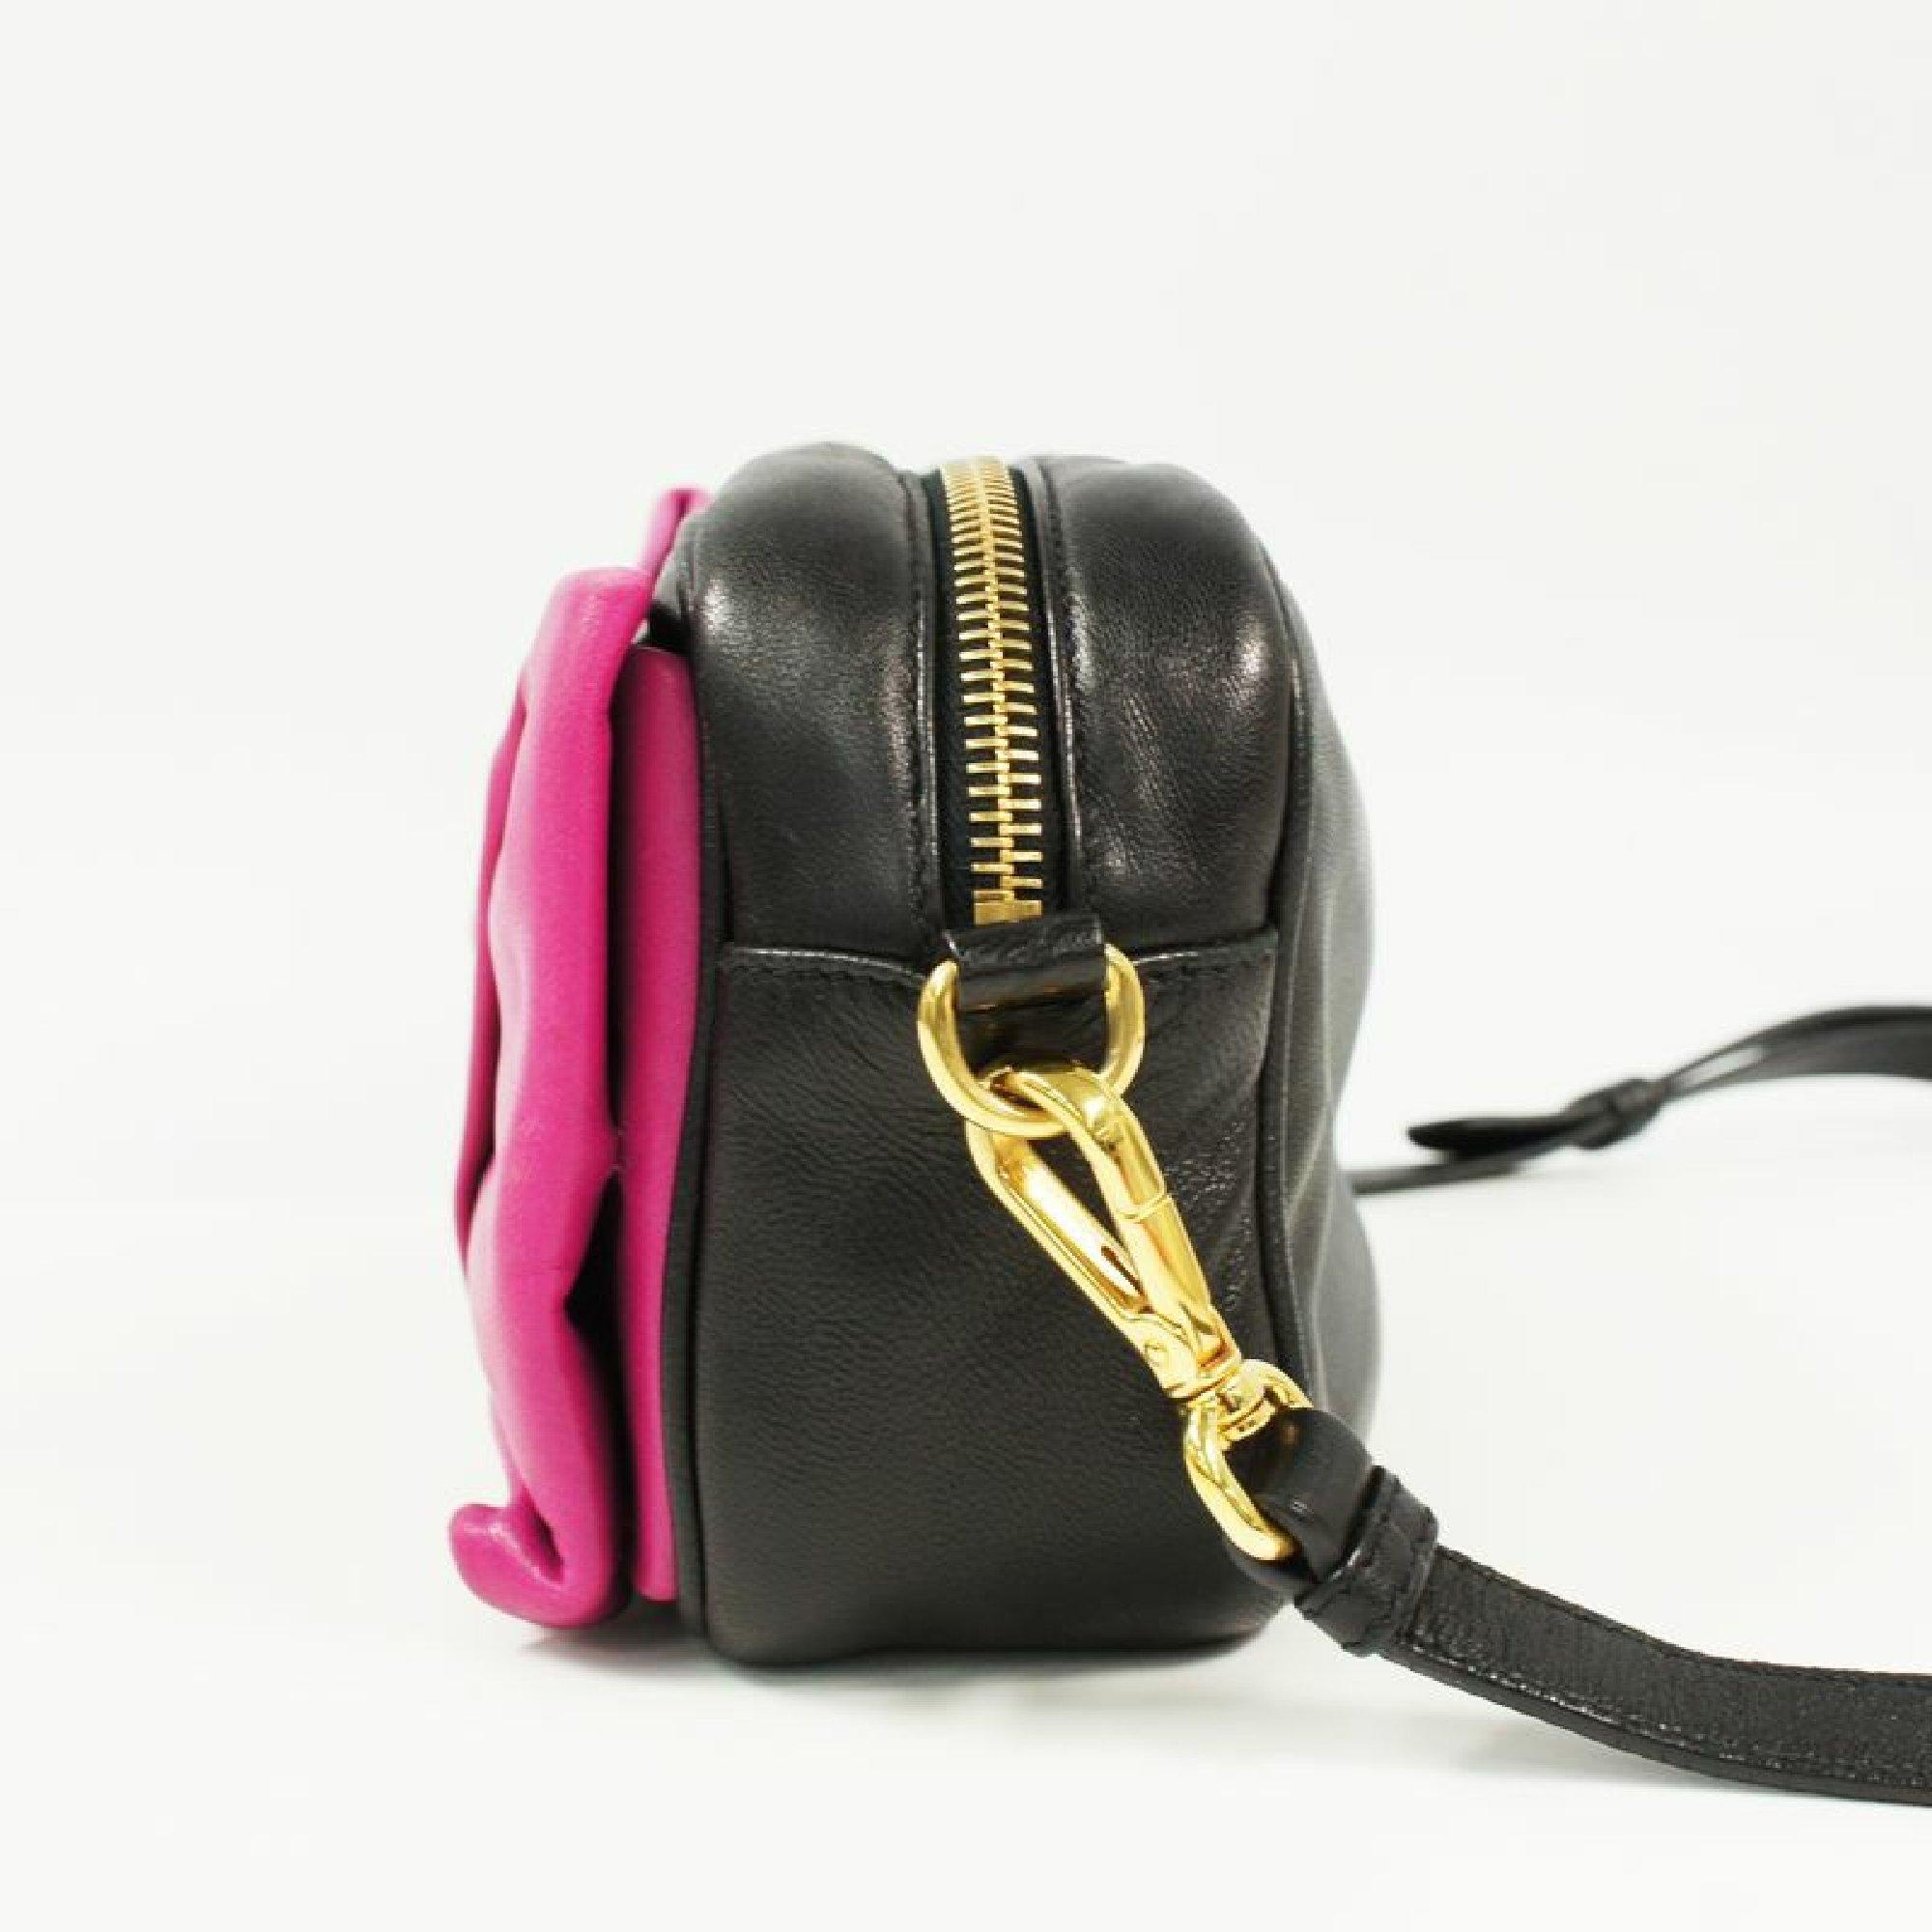 An authentic PRADA ribbon motif Mini shoulder 2WAY pouch Womens shoulder bag pink x black x g. The color is pink x black x gold hardware. The outside material is Leather. The pattern is ribbon motif  Mini shoulder 2WAY pouch. This item is